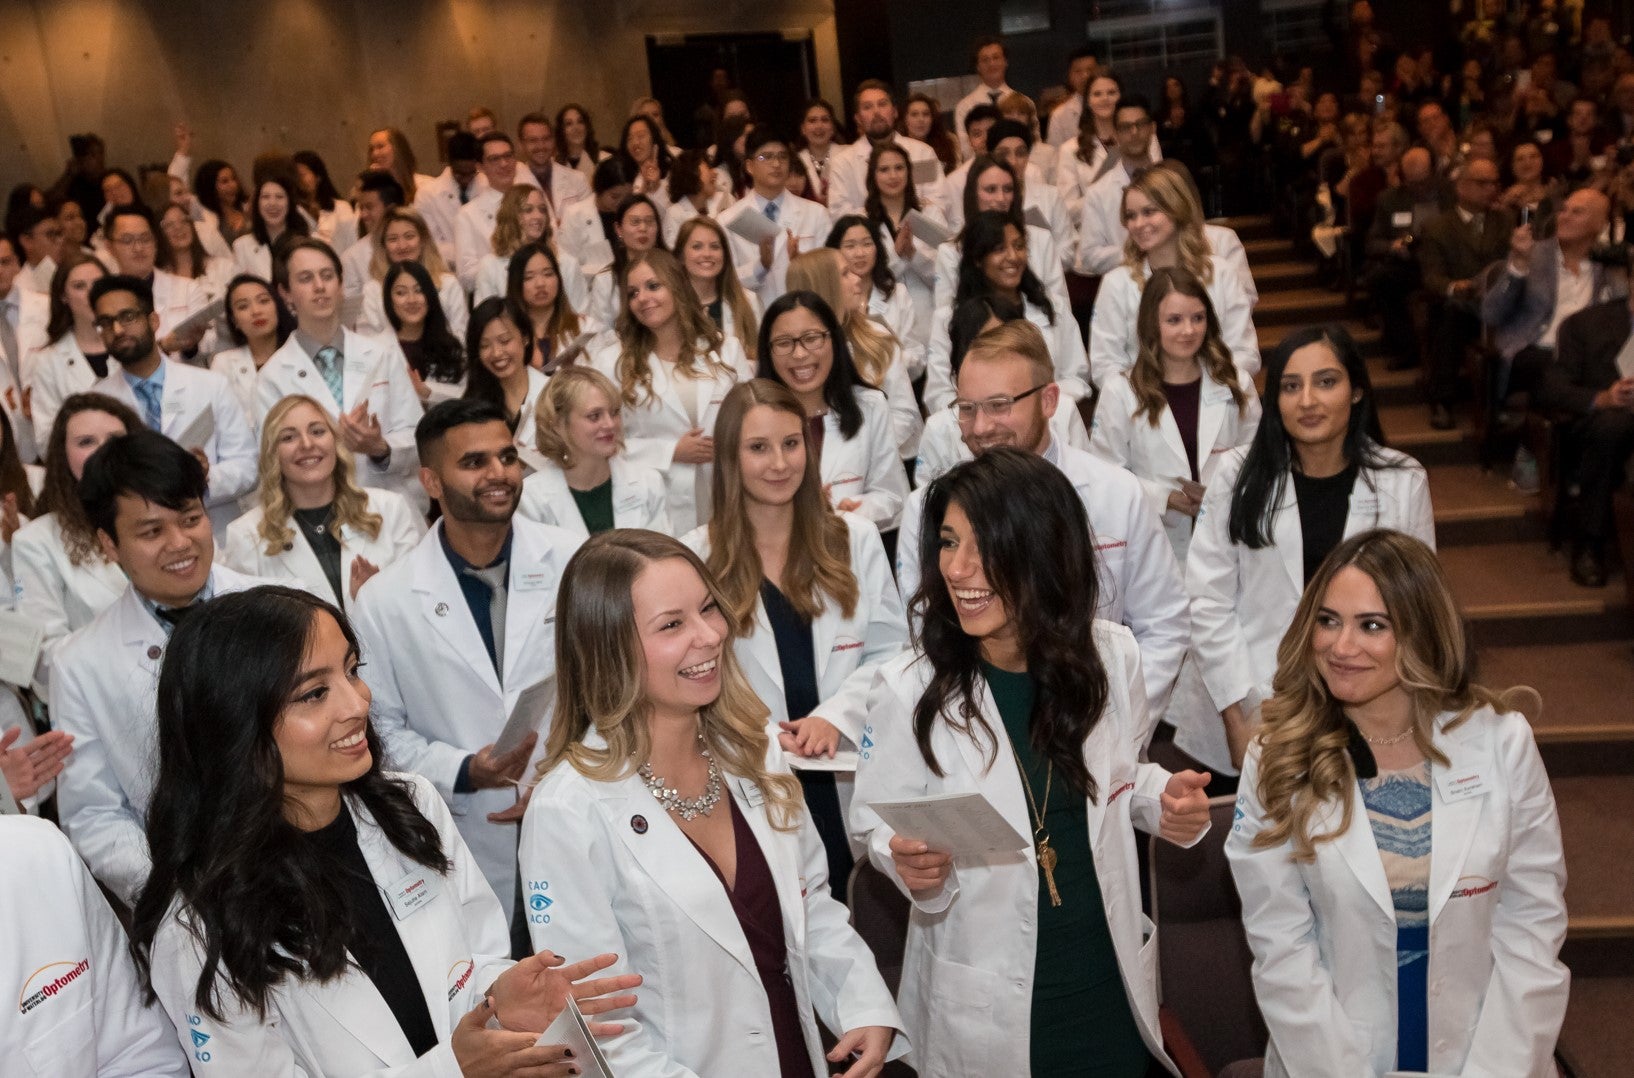 White coat ceremony image from last year